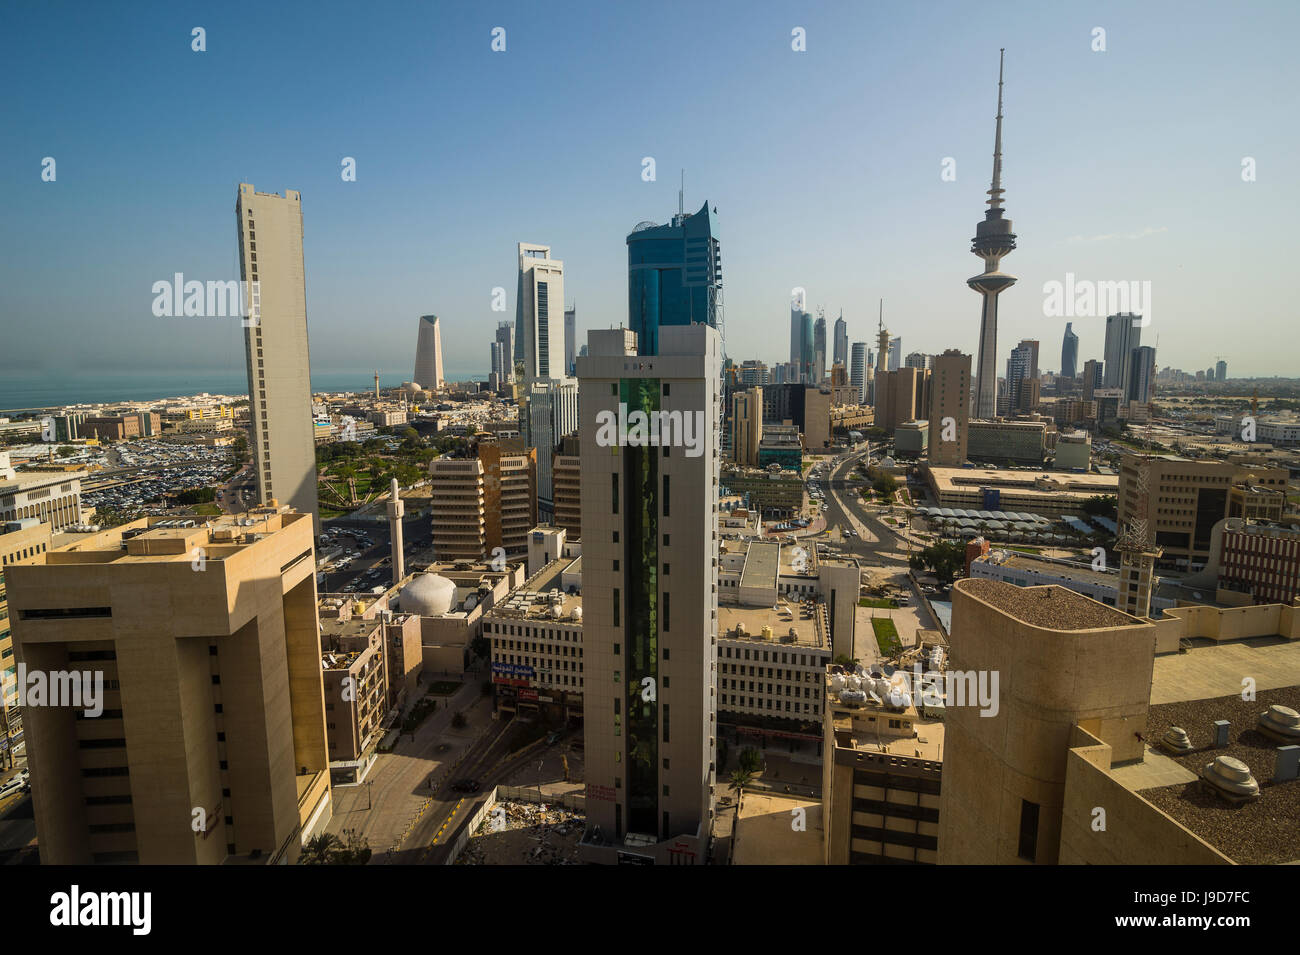 View over Kuwait City, Kuwait, Middle East Stock Photo